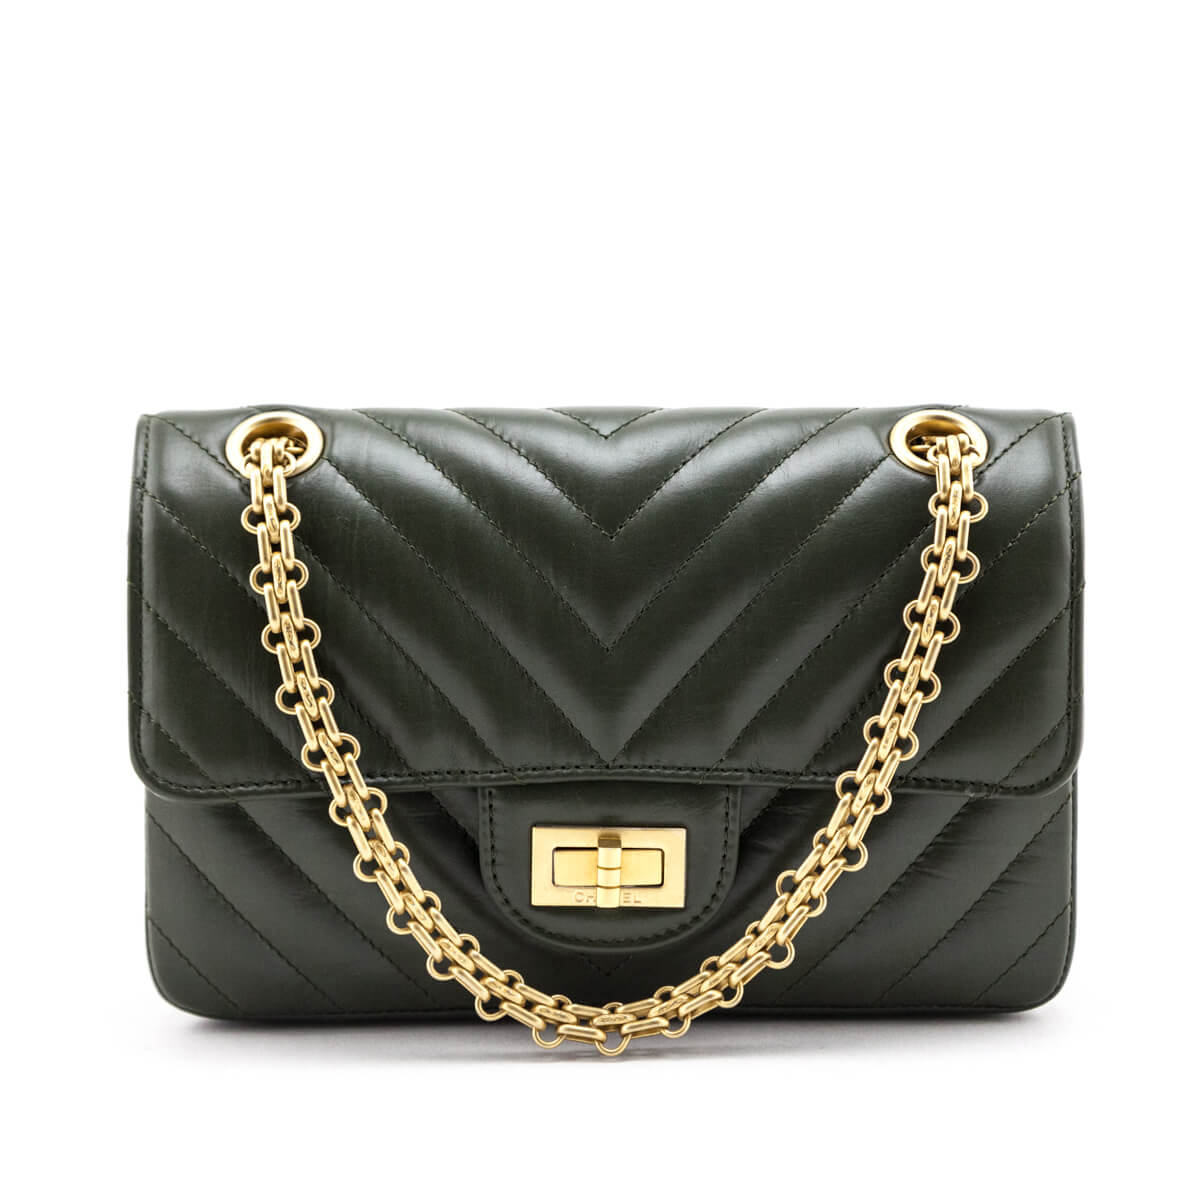 Chanel Green Quilted Aged Calfskin Chevron Mini Reissue Flap Bag